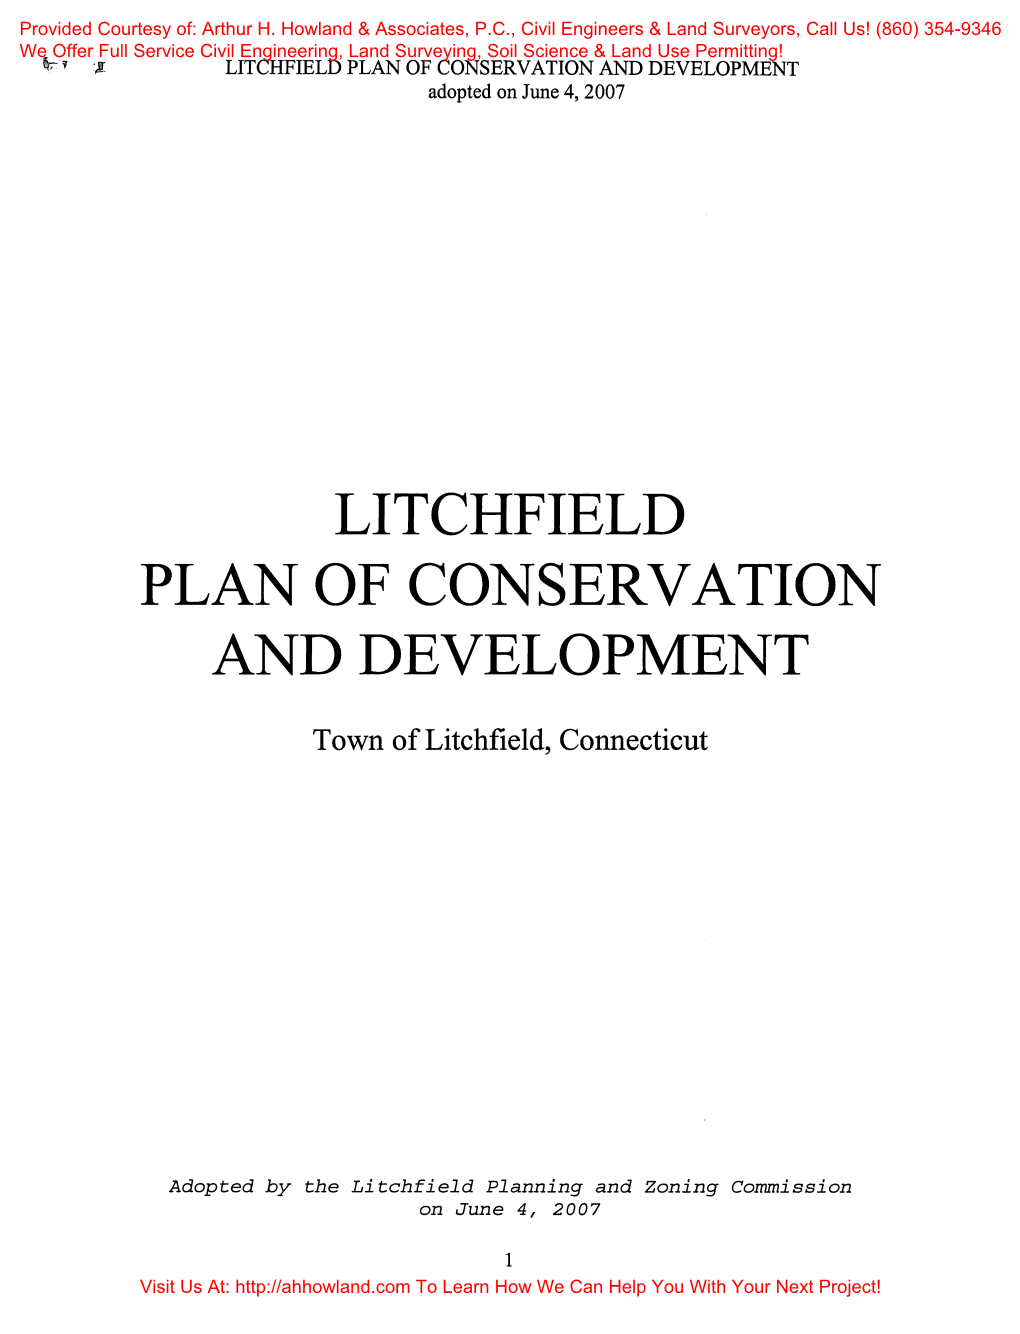 LITCHFIELD PLAN of CONSERVATION and DEVELOPMENT Adopted on June 4, 2007